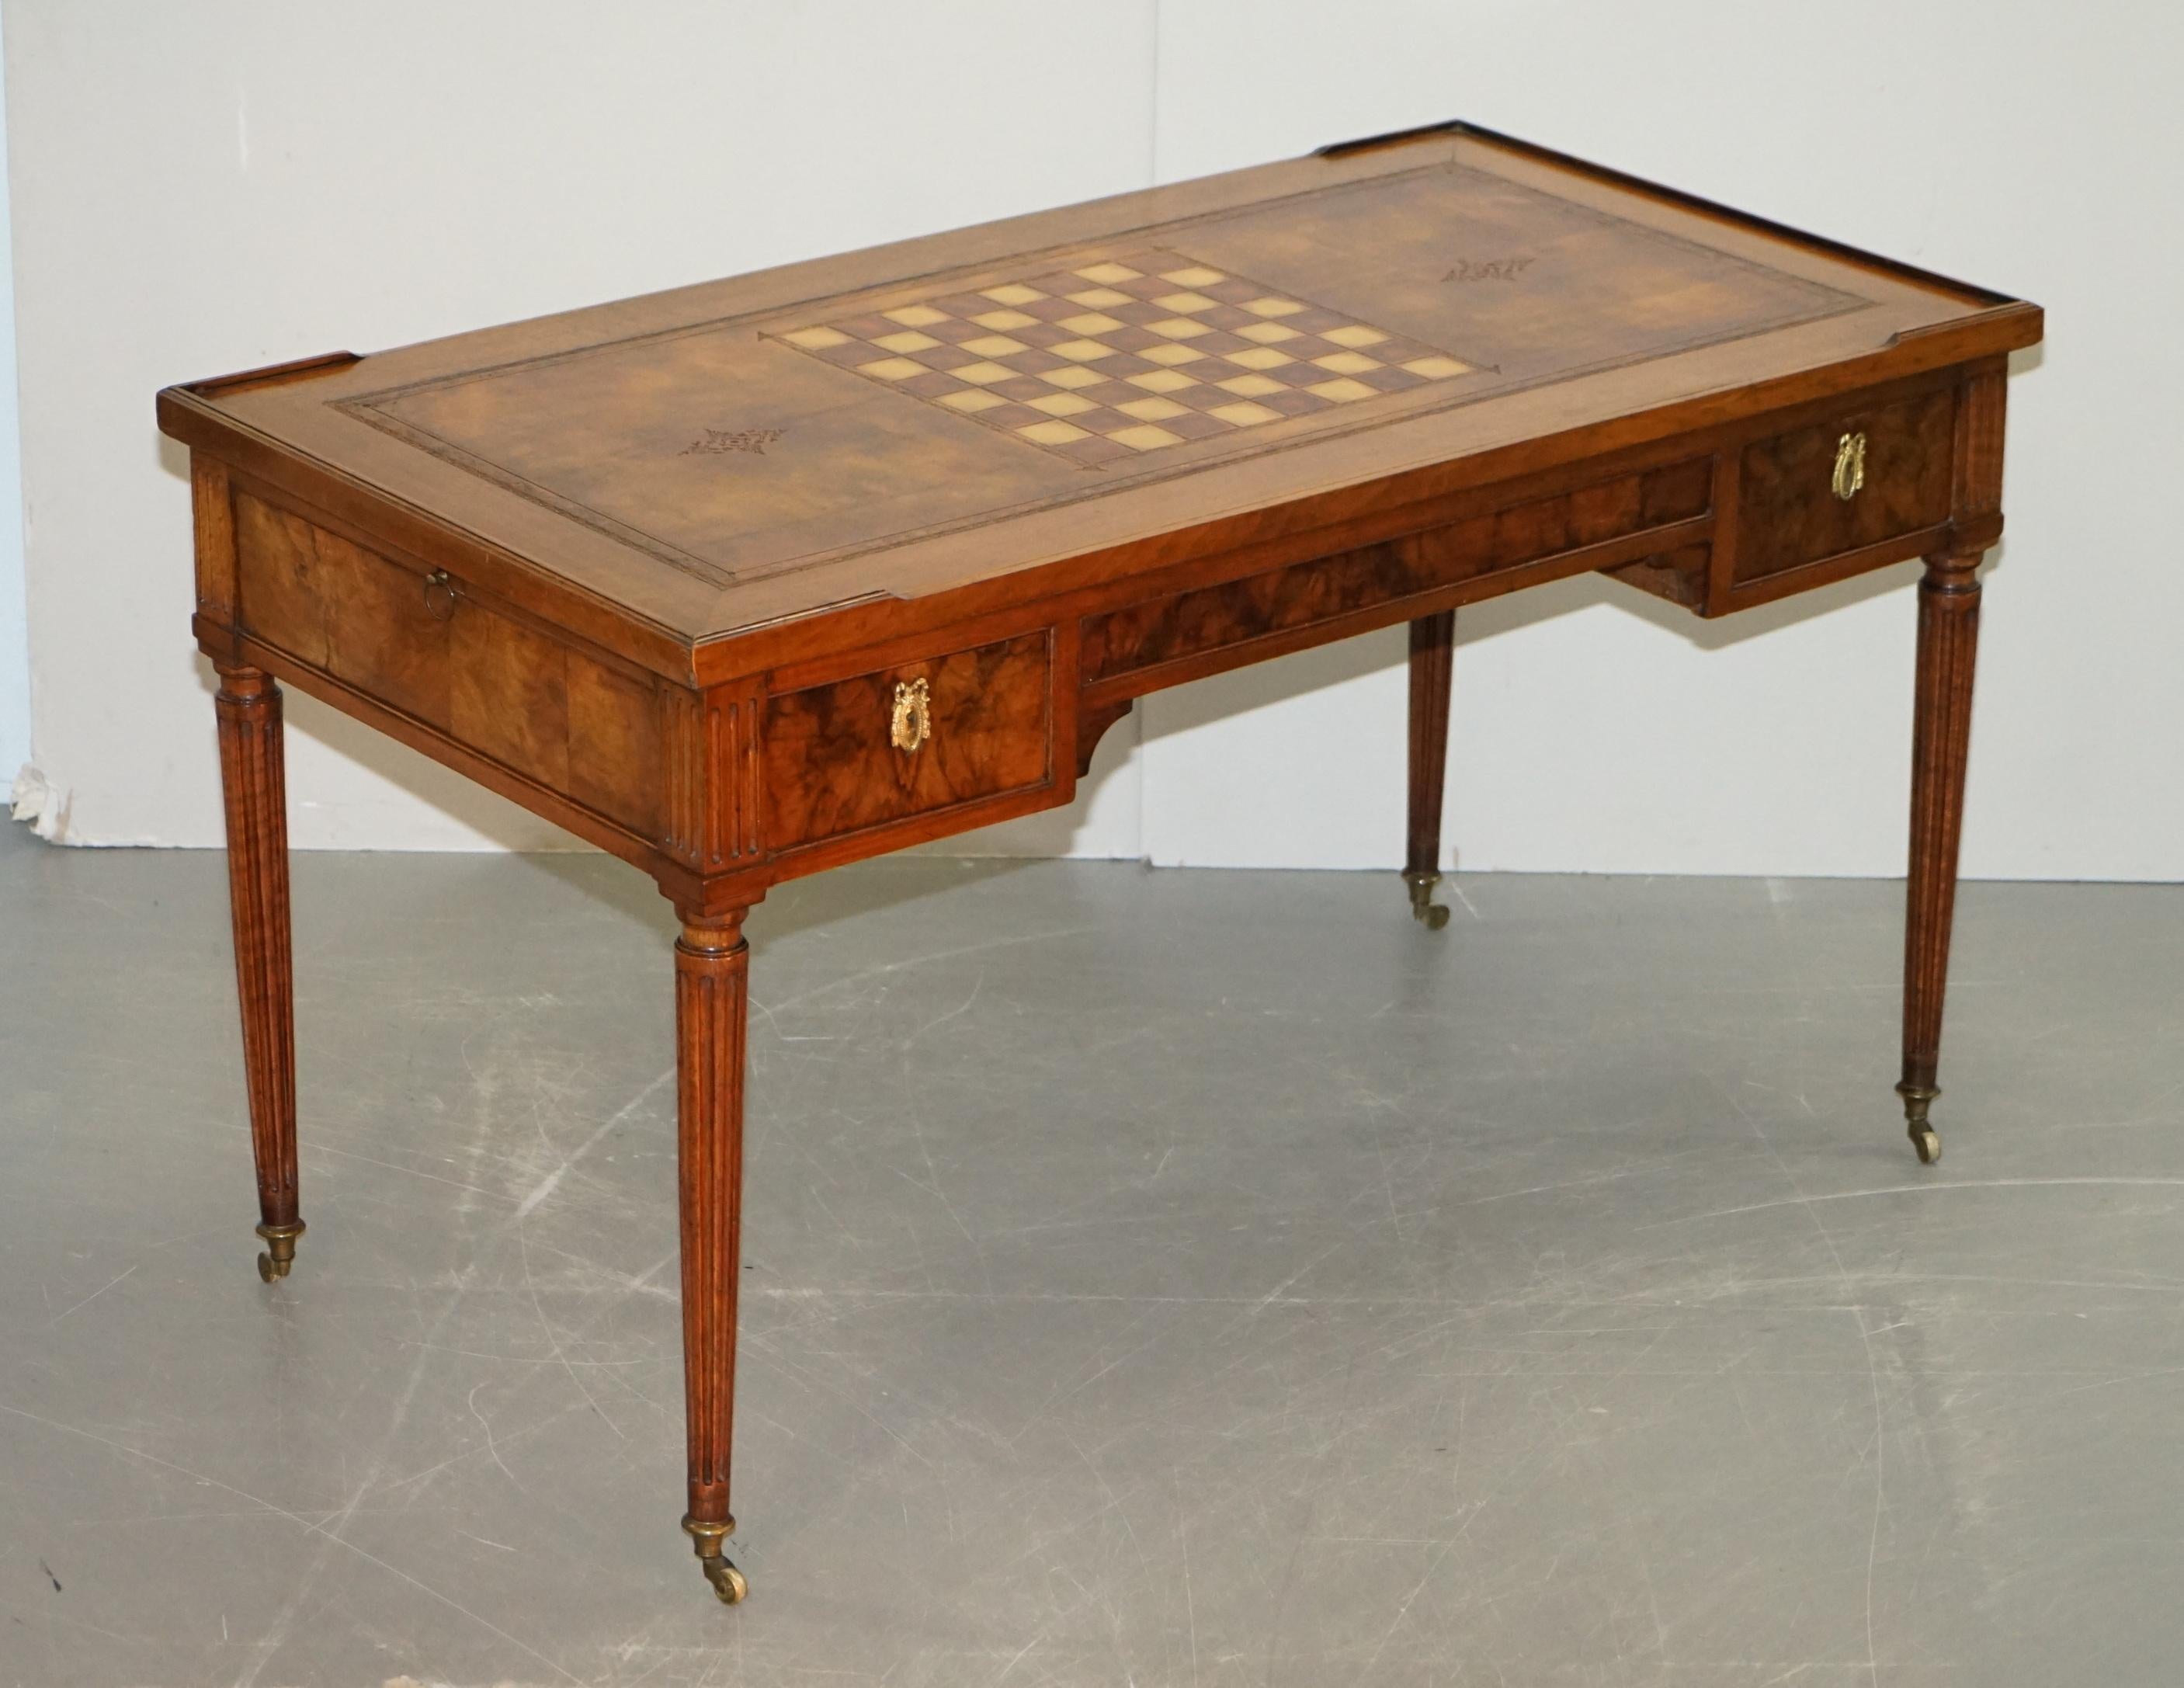 We are delighted to offer for sale this absolutely sublime fully restored one of a kind Louis XVI circa 1780 period Tric Trac games table in Walnut, Hardwood and brown leather

An image of Marie-Antoinette’s games room, the ‘Salon de la Paix’ at